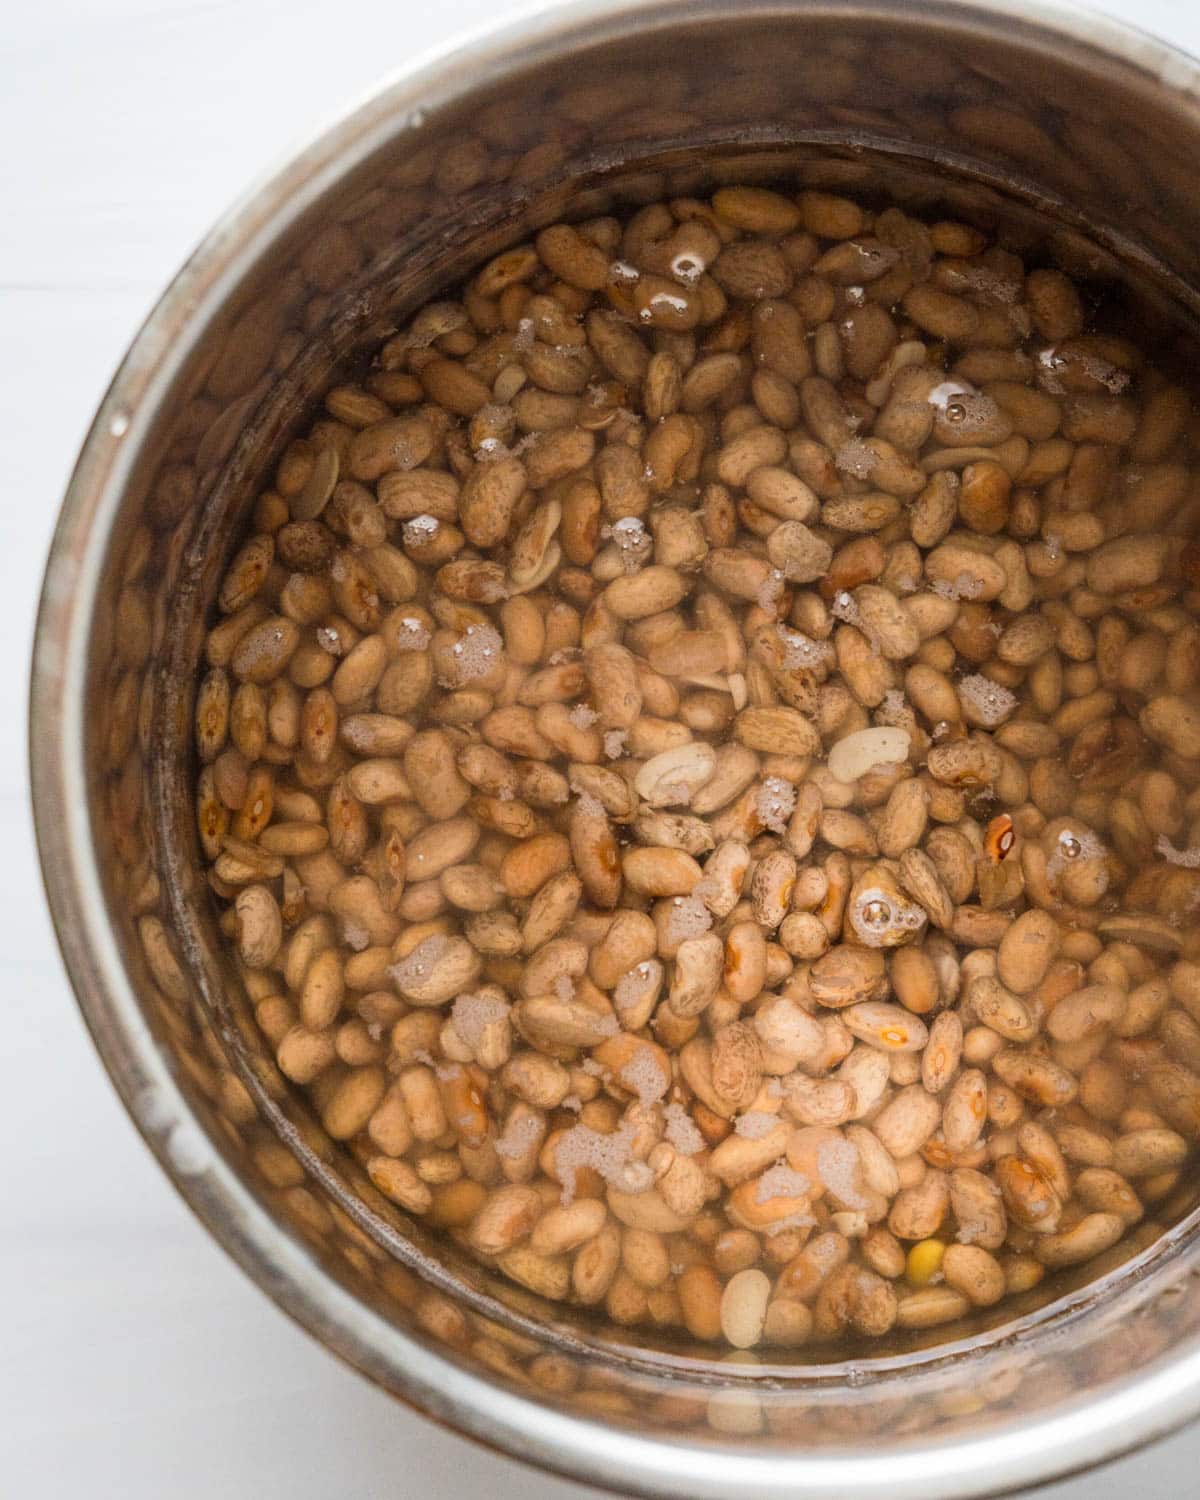 the pinto beans after soaking overnight.